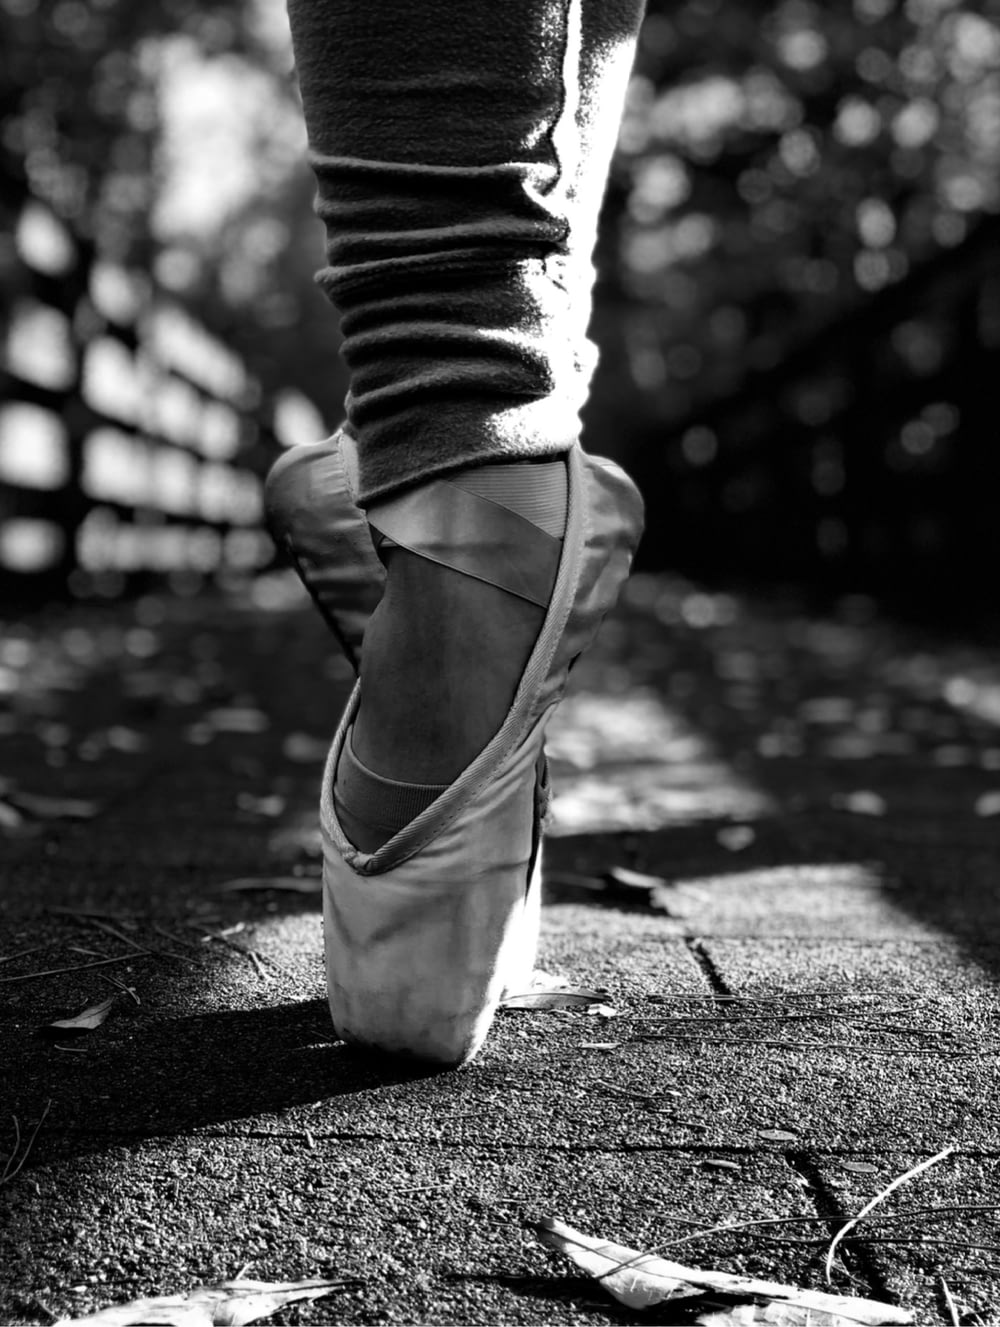 a black and white photo of a person wearing ballet shoes